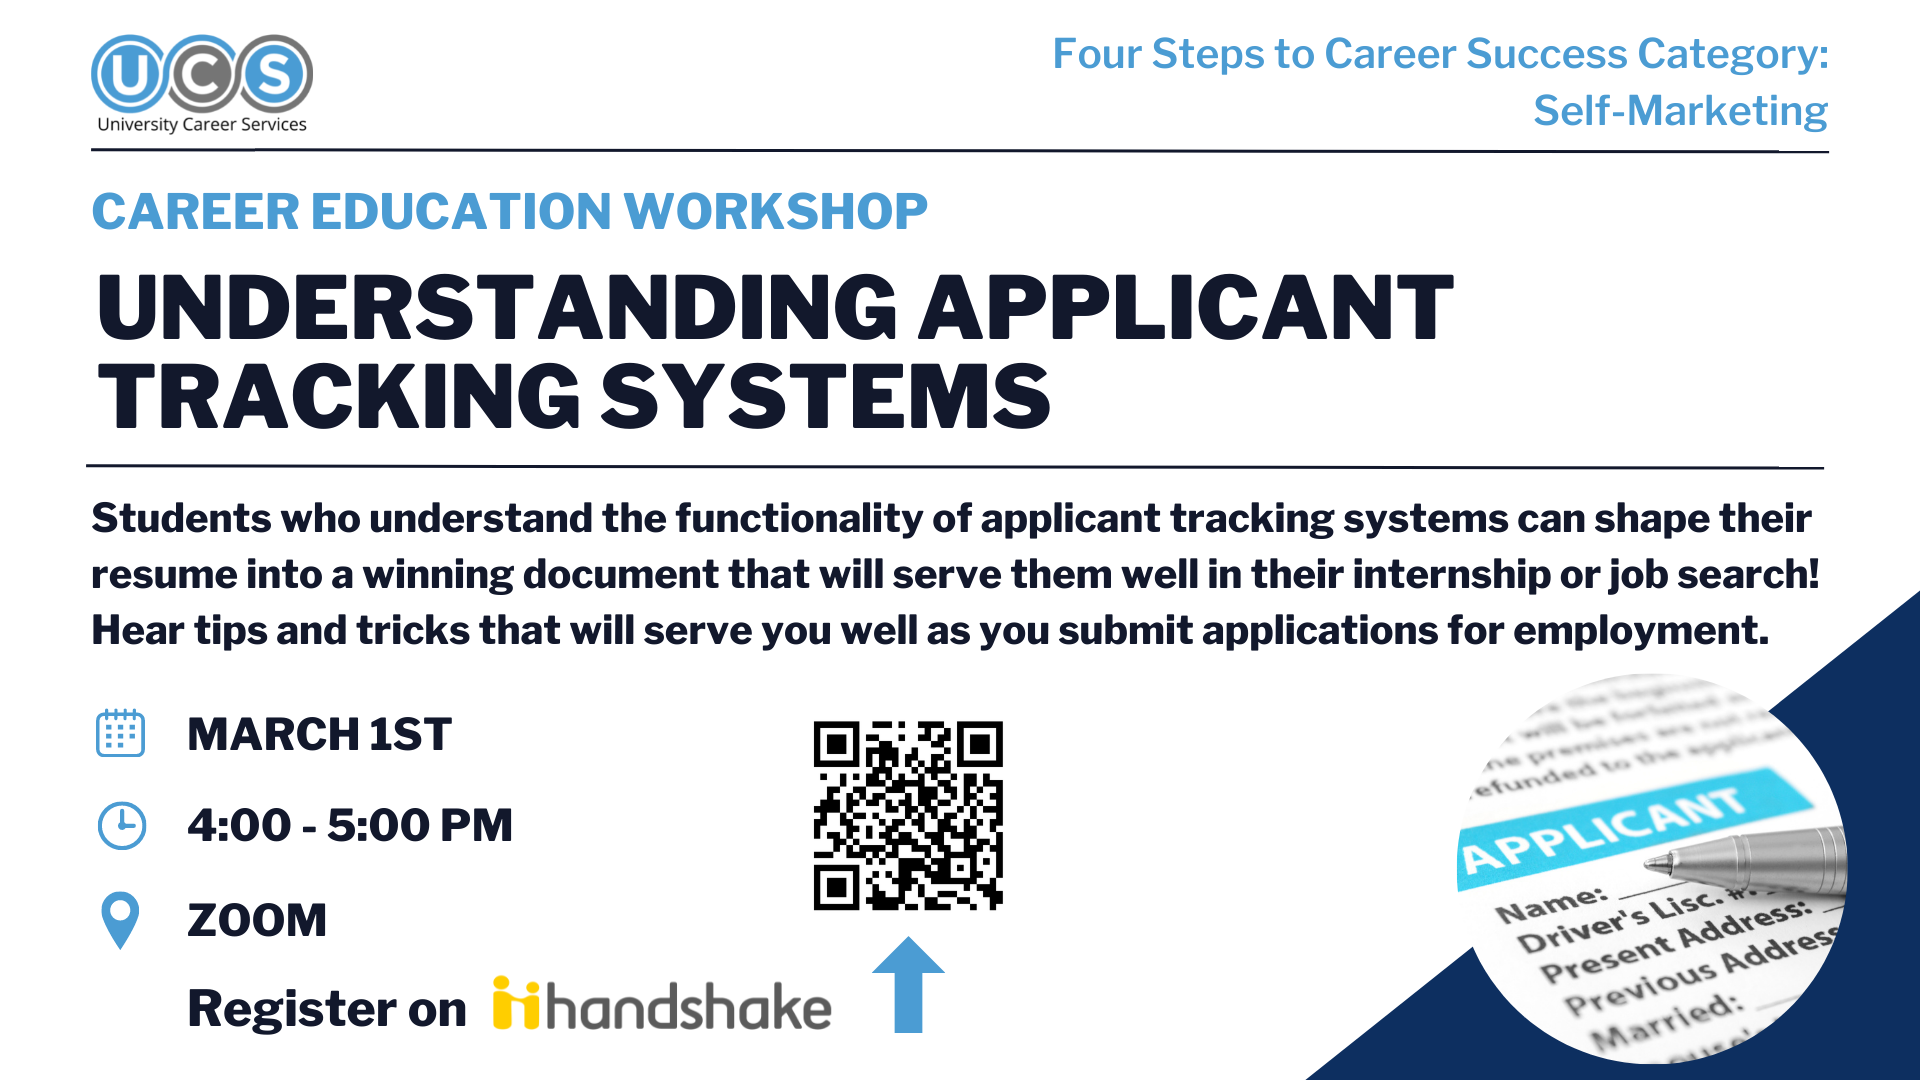 Students who understand the functionality of applicant tracking systems can shape their resume into a winning document that will serve them well in their internship or job search! Hear tips and tricks that will serve you well as you submit applications fo